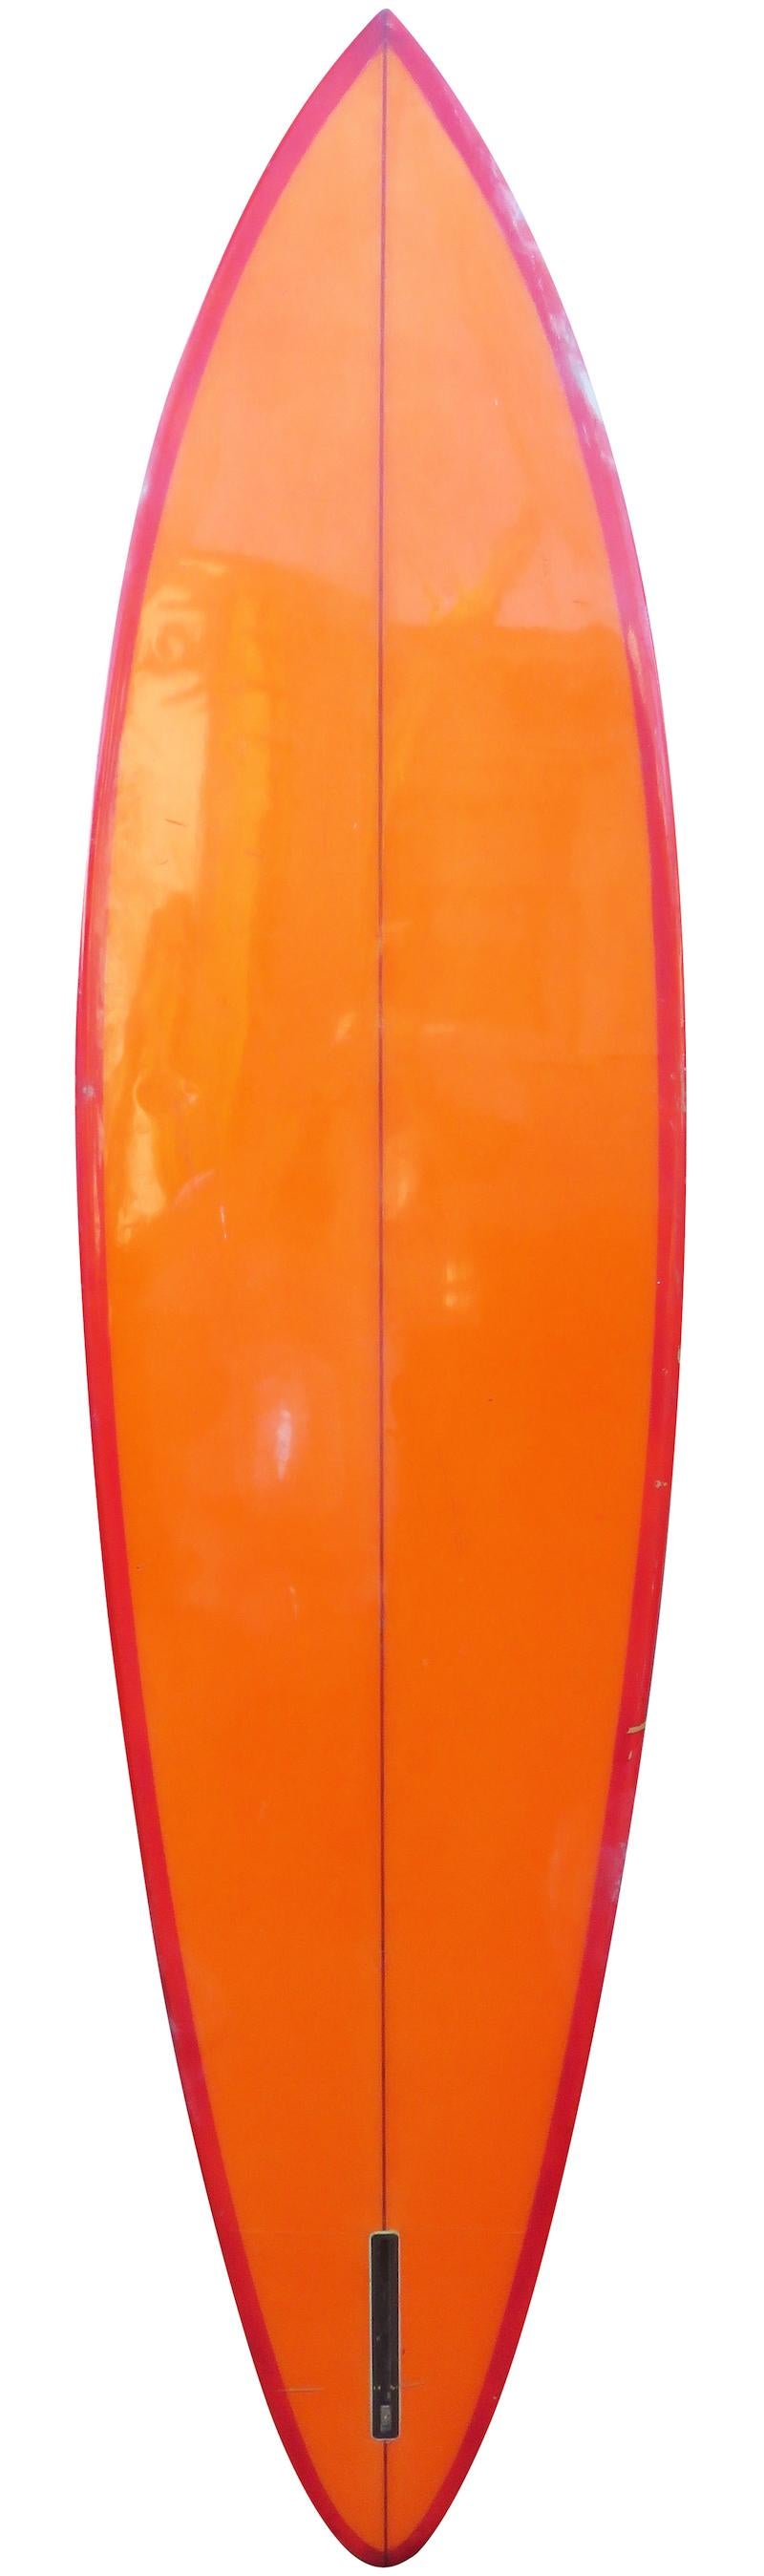 Late 1970s Jacks Surfboards pintail surfboard shaped by Rick Mchale. Features a beautiful red tint with white marbled deck, white pin striping, and orange tinted bottom. A fantastic example of a late 1970s vintage surfboard in all original